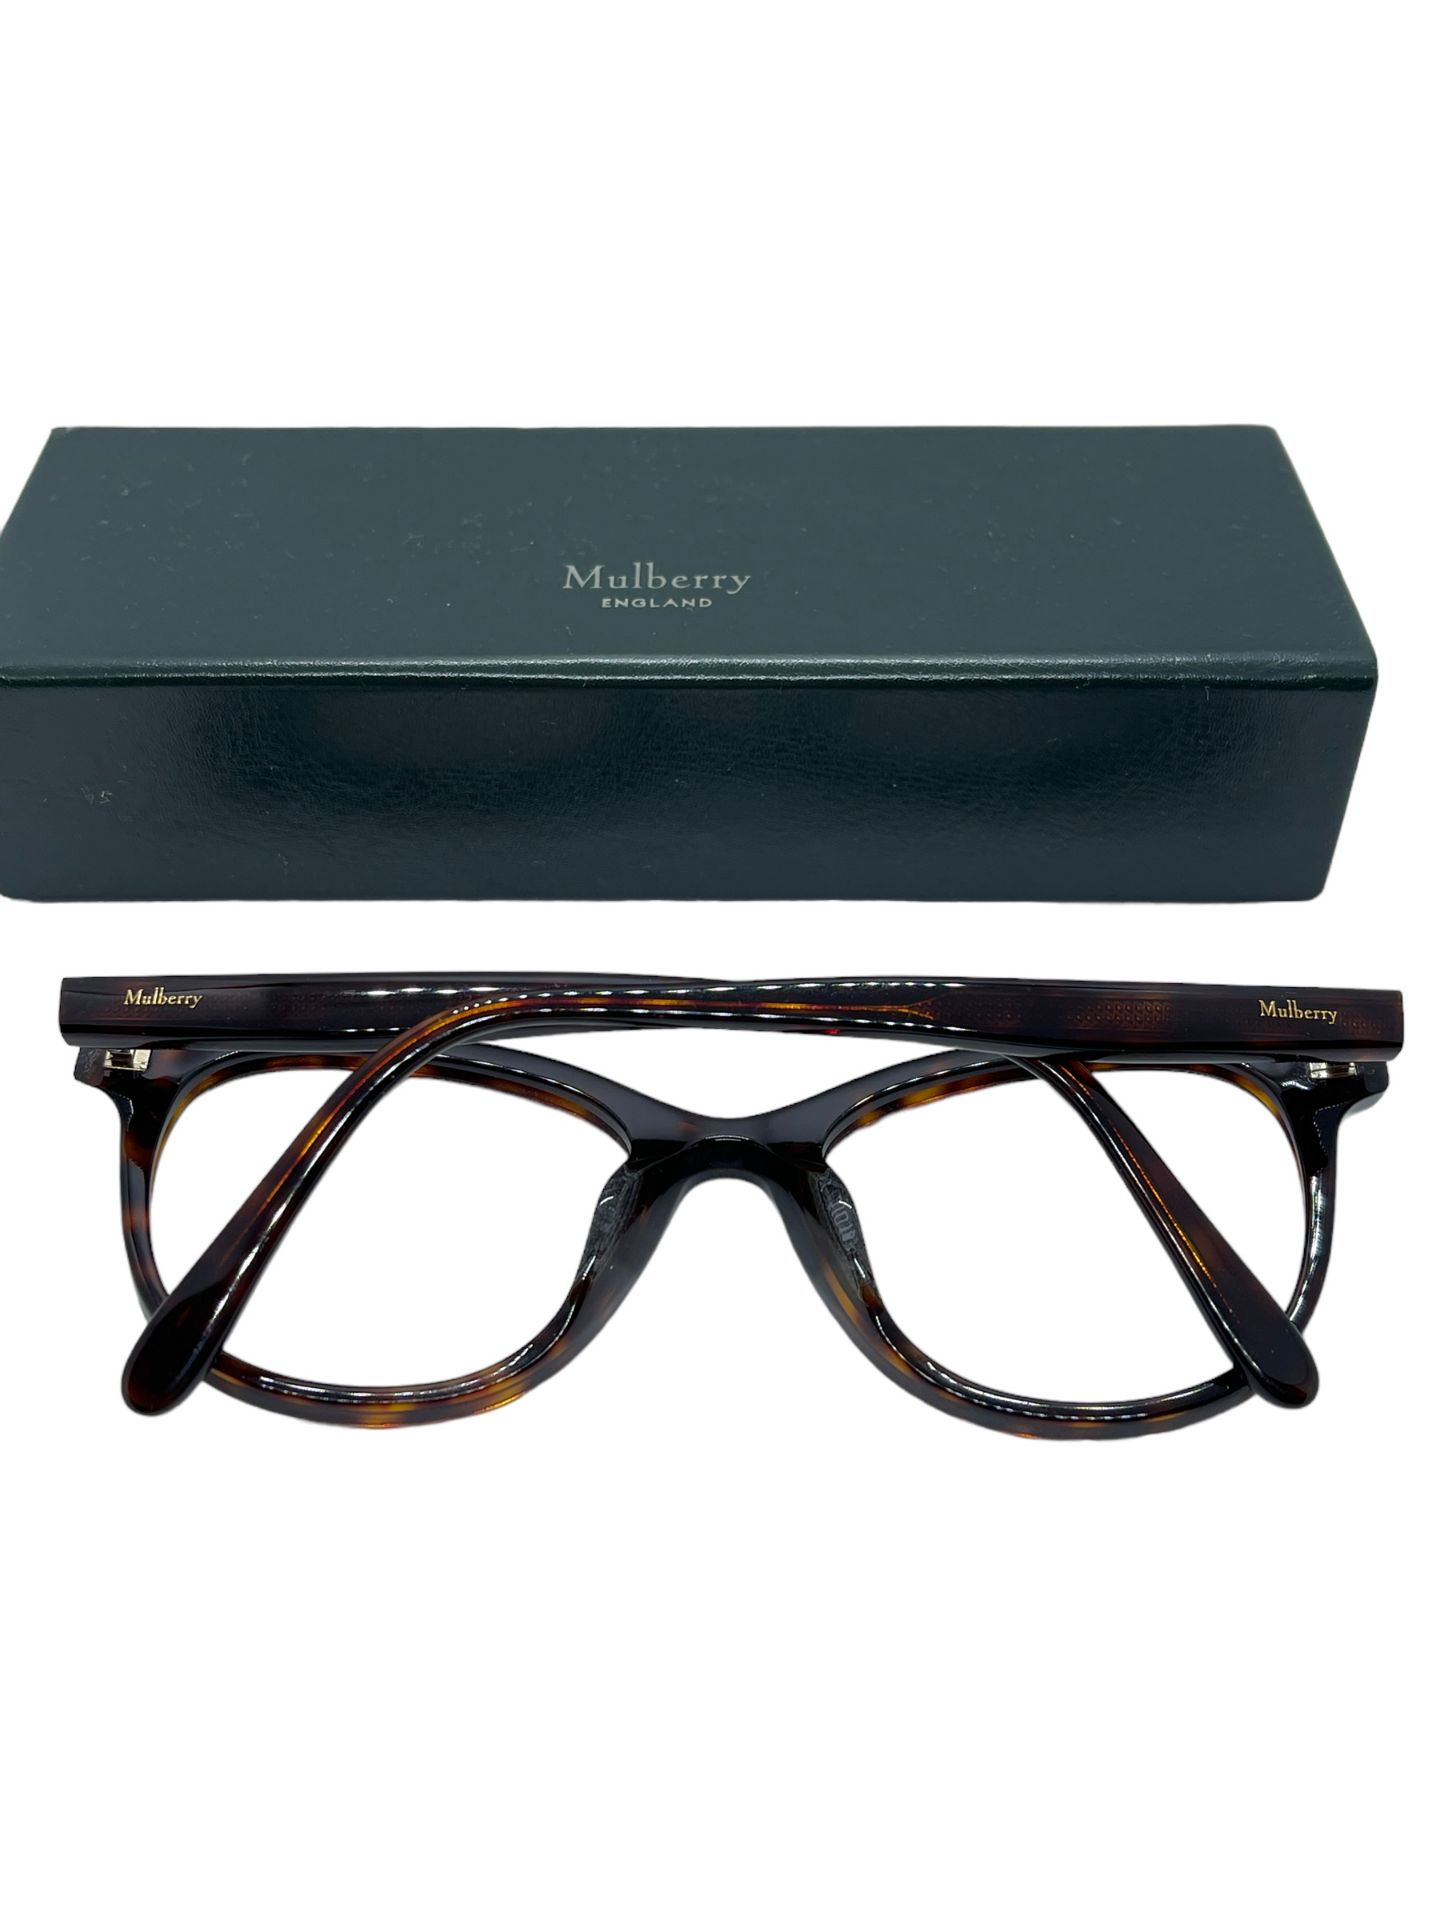 Mulberry Specticals xdemo boxed case unisex - Image 2 of 6